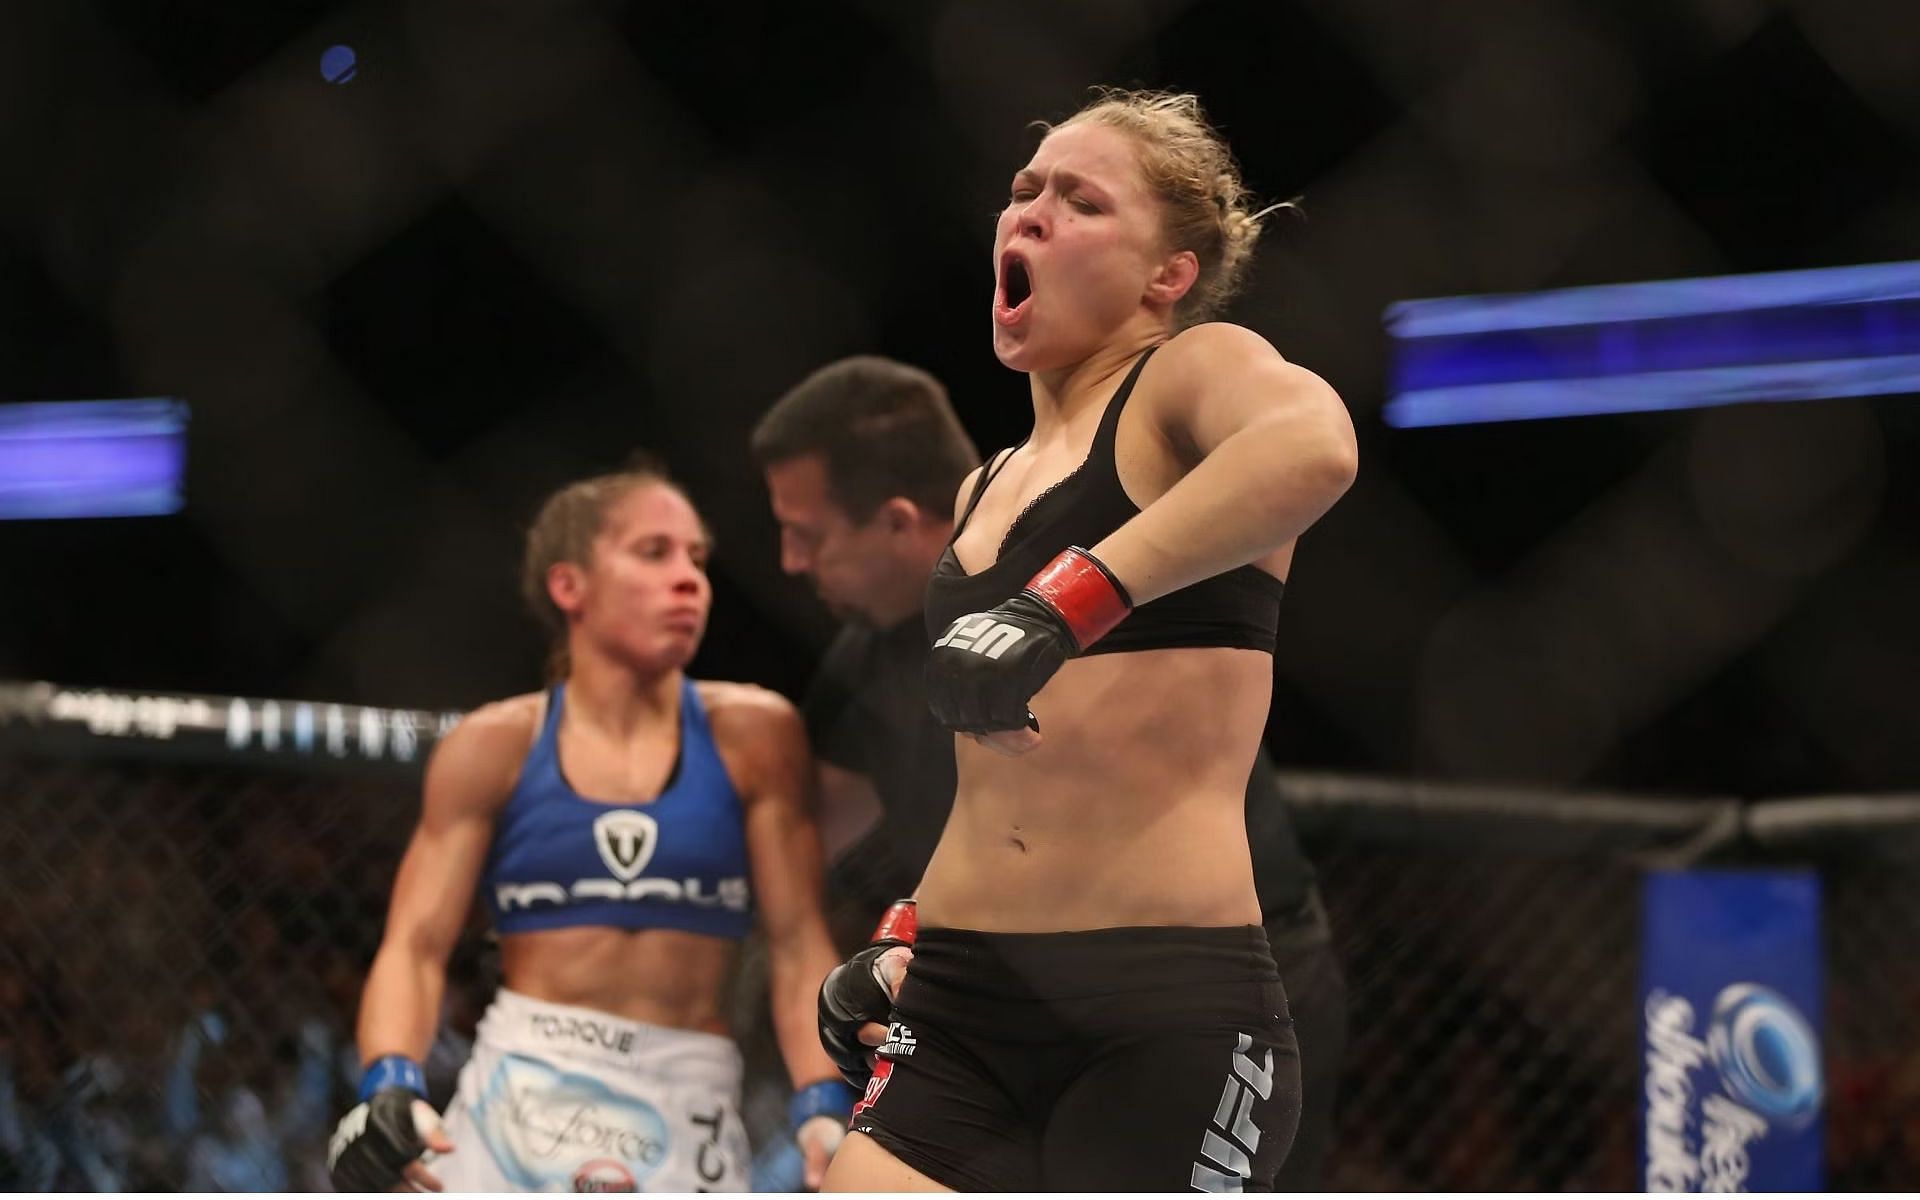 Could Ronda Rousey be ready for a UFC comeback? [Image Credit: Getty]